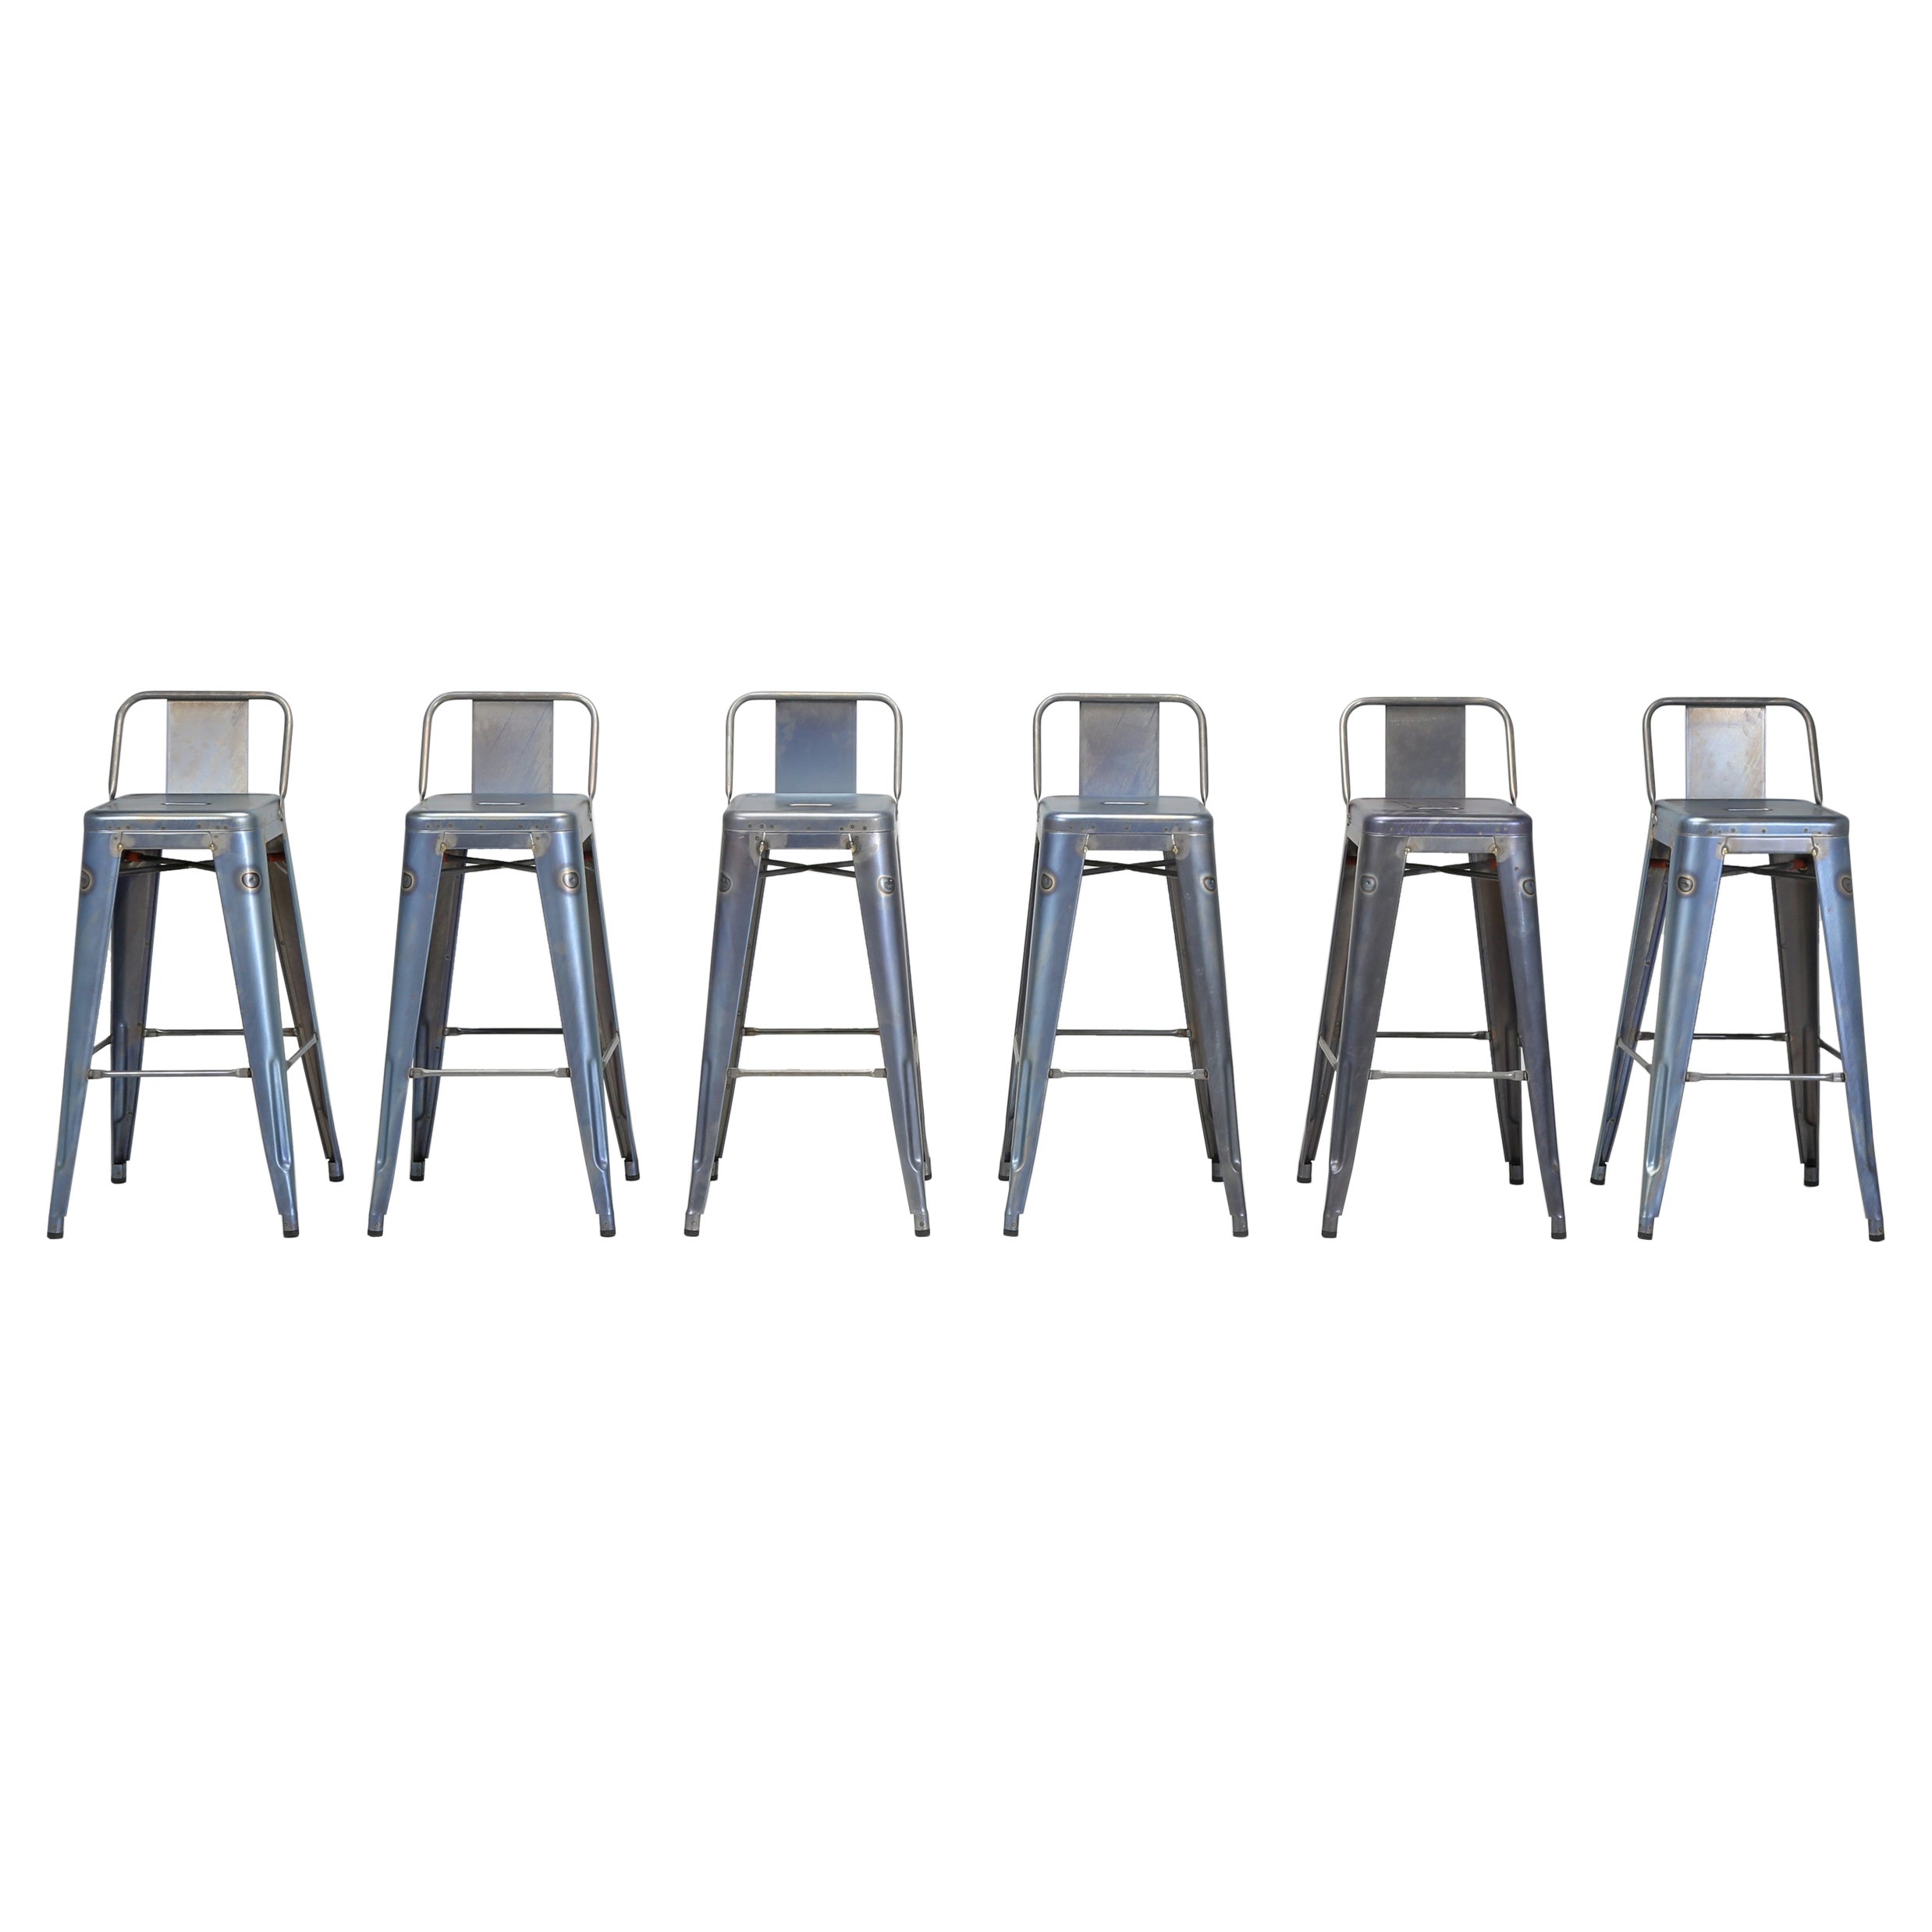 Tolix Bar-Height Stools Set (6) Blue Wash Paint or Leave as is. Dozens Available